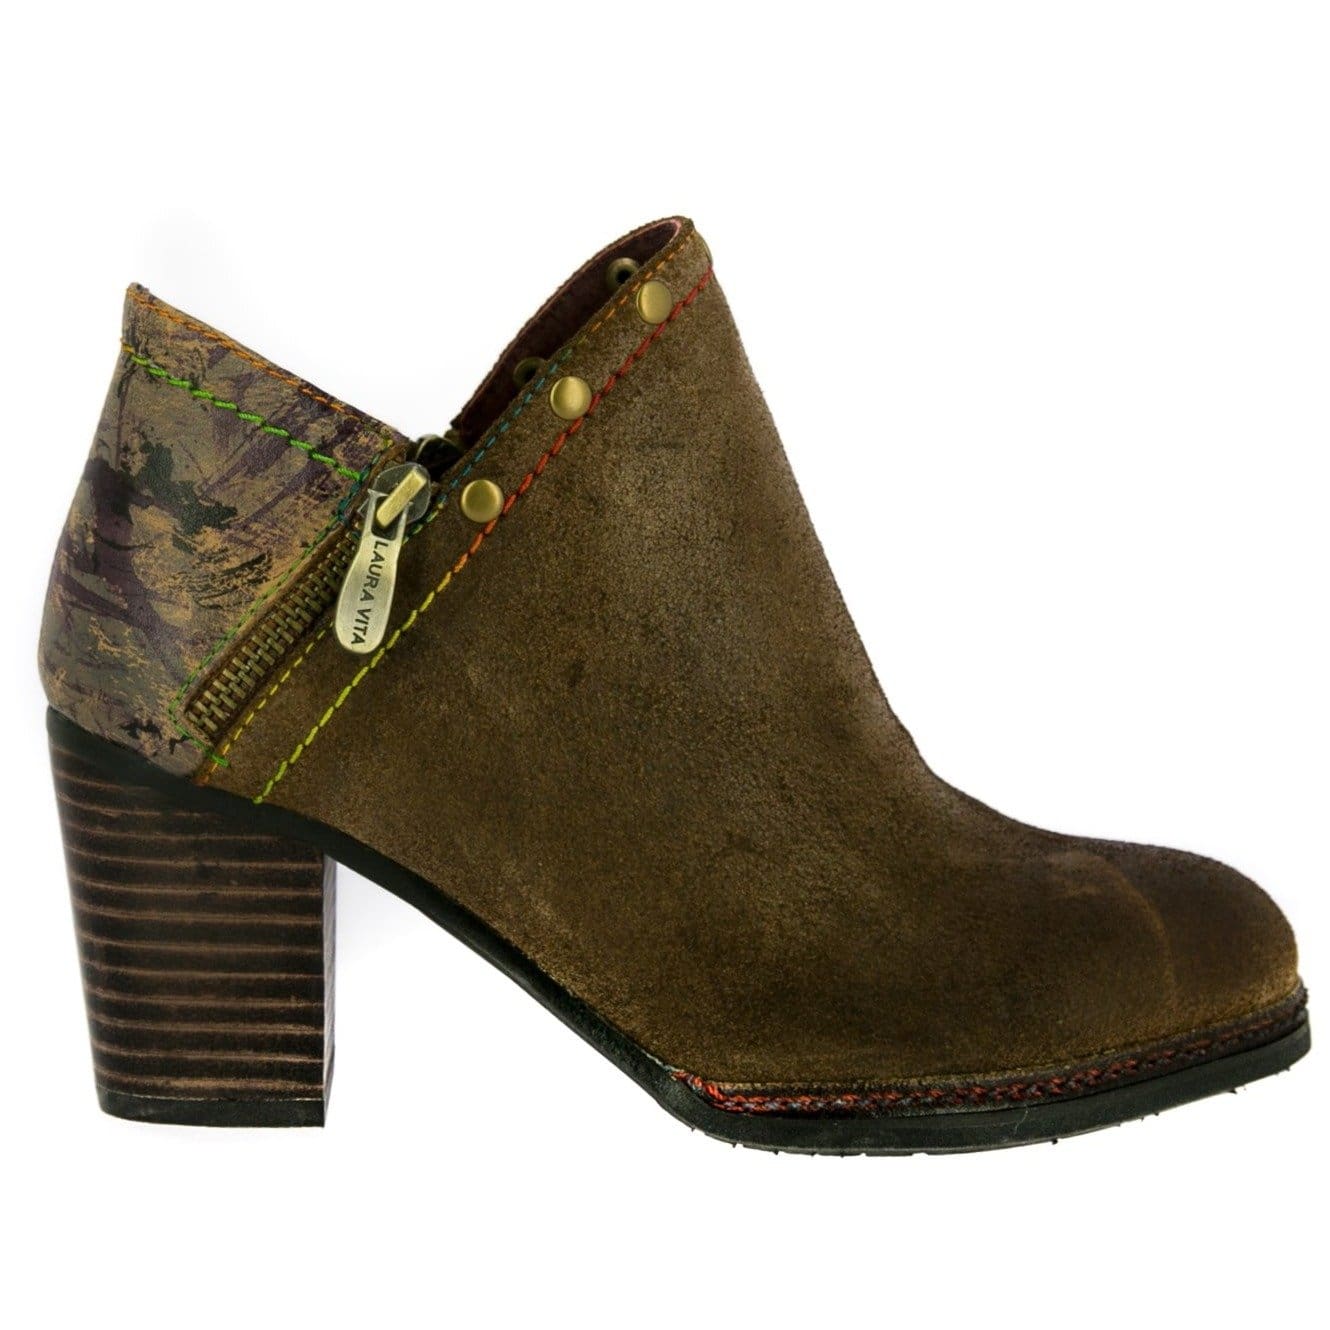 CASSIE shoes 33 - 35 / Camel - Boot